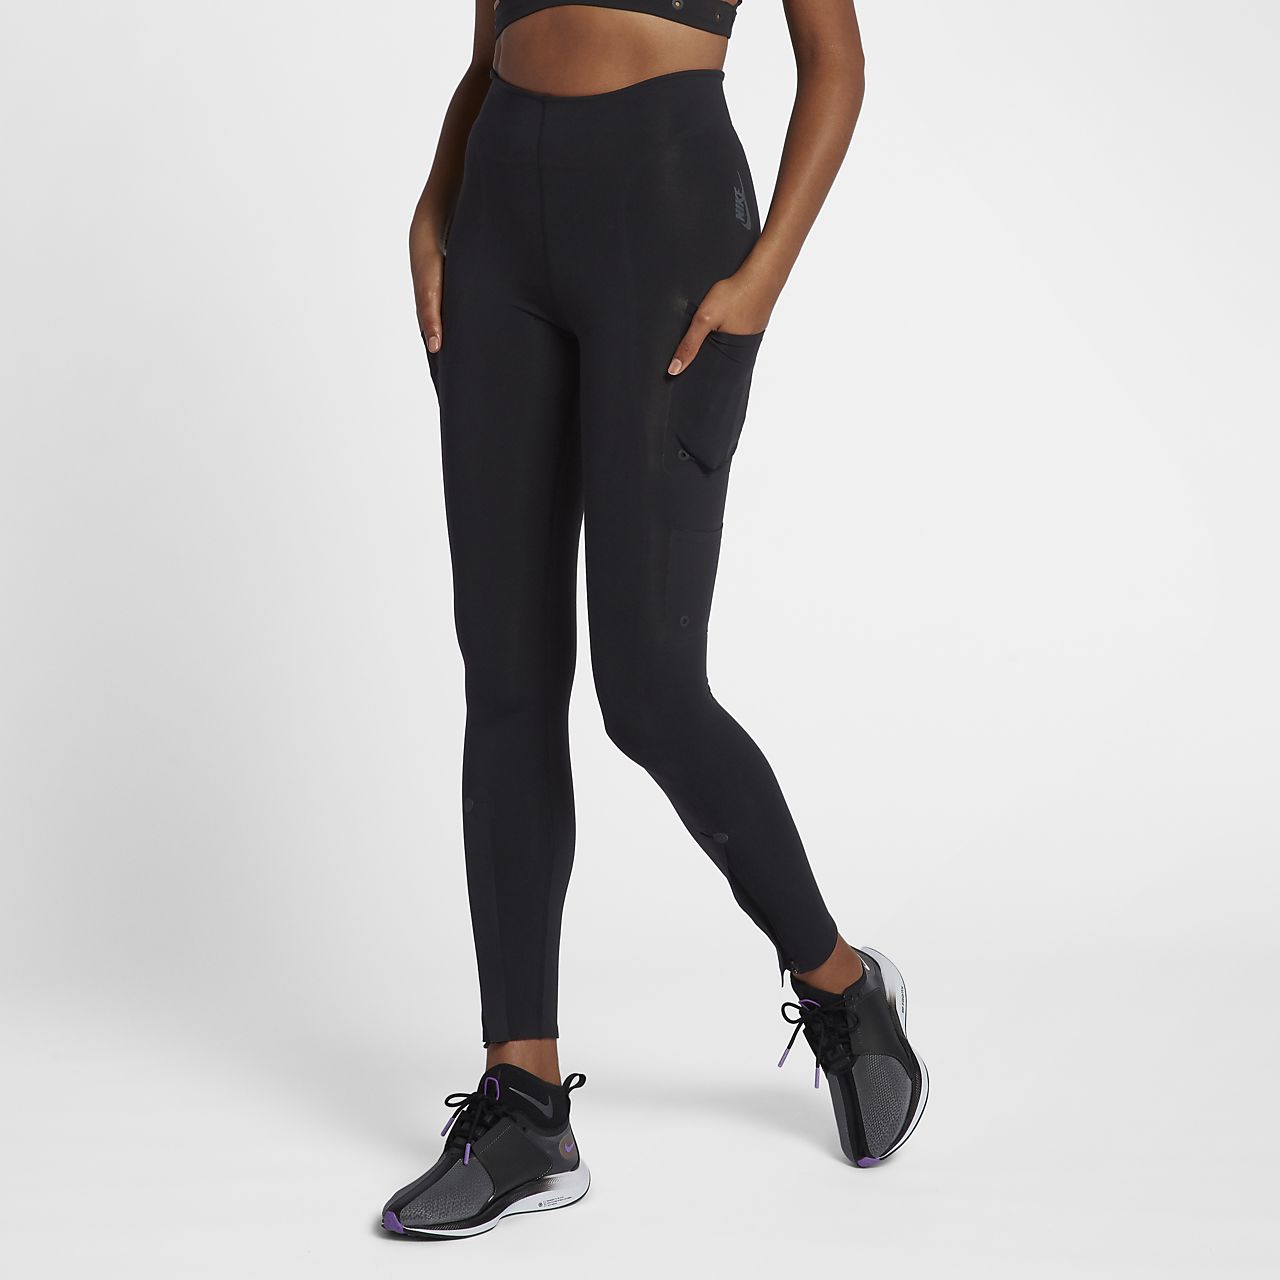 nike women's tights with pocket